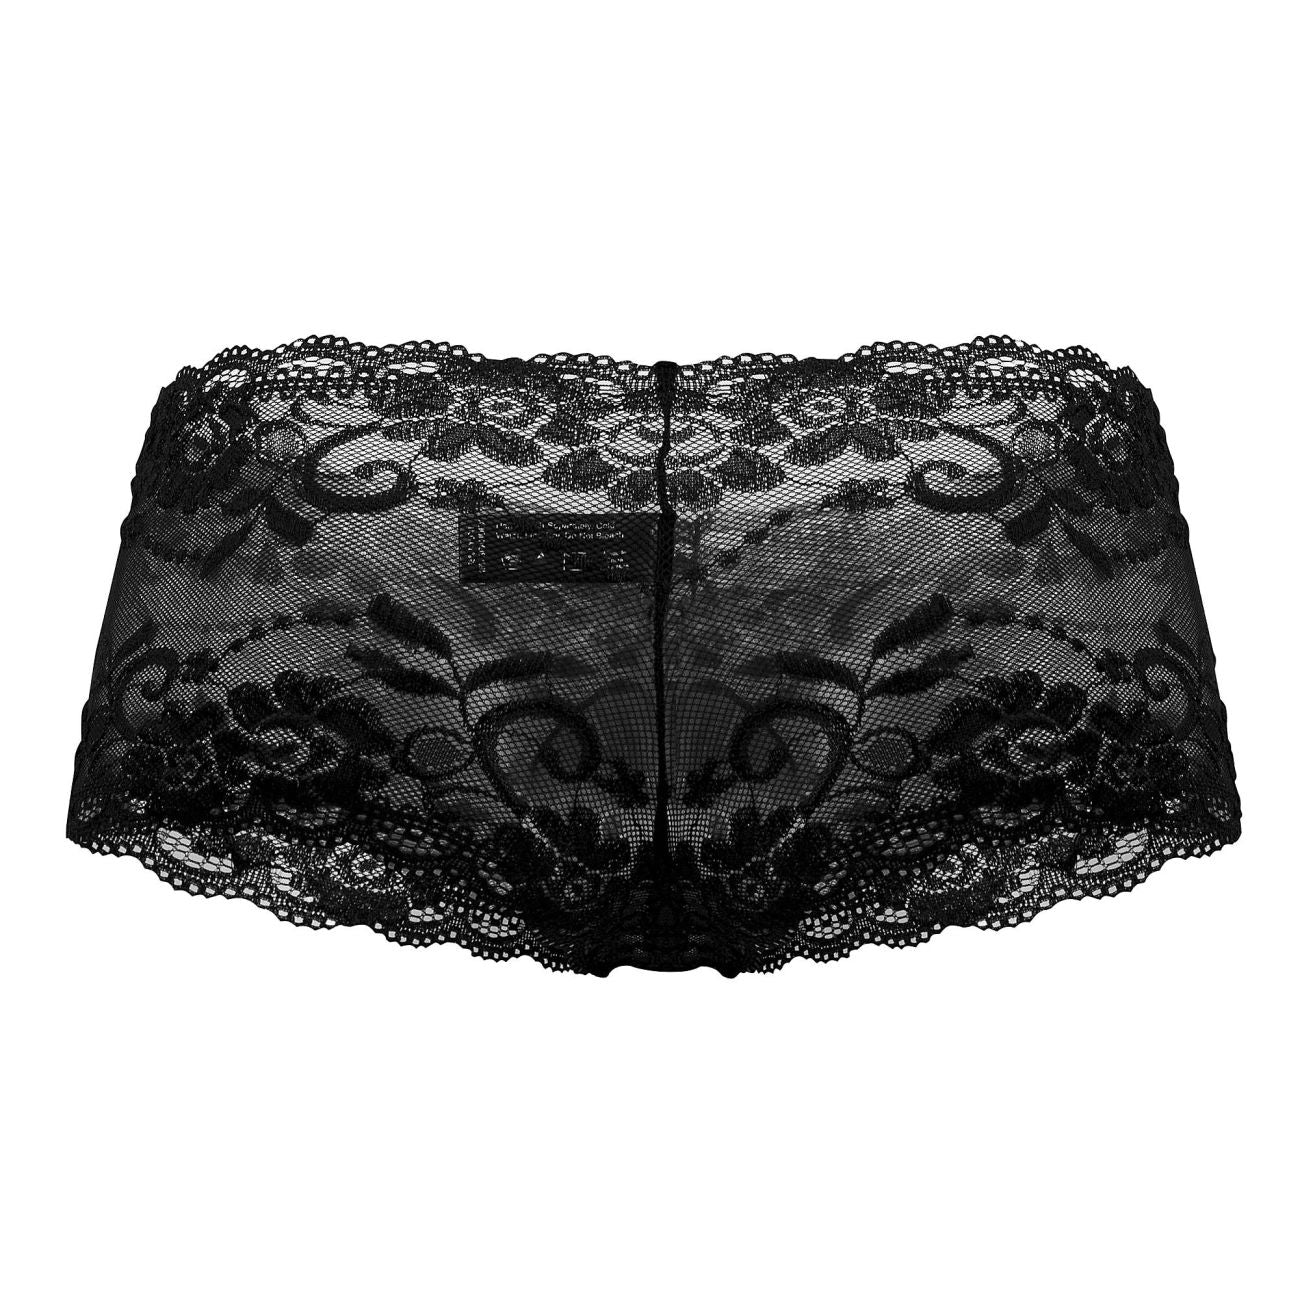 Male Power Sassy Lace Mini Short Sheer Pouch